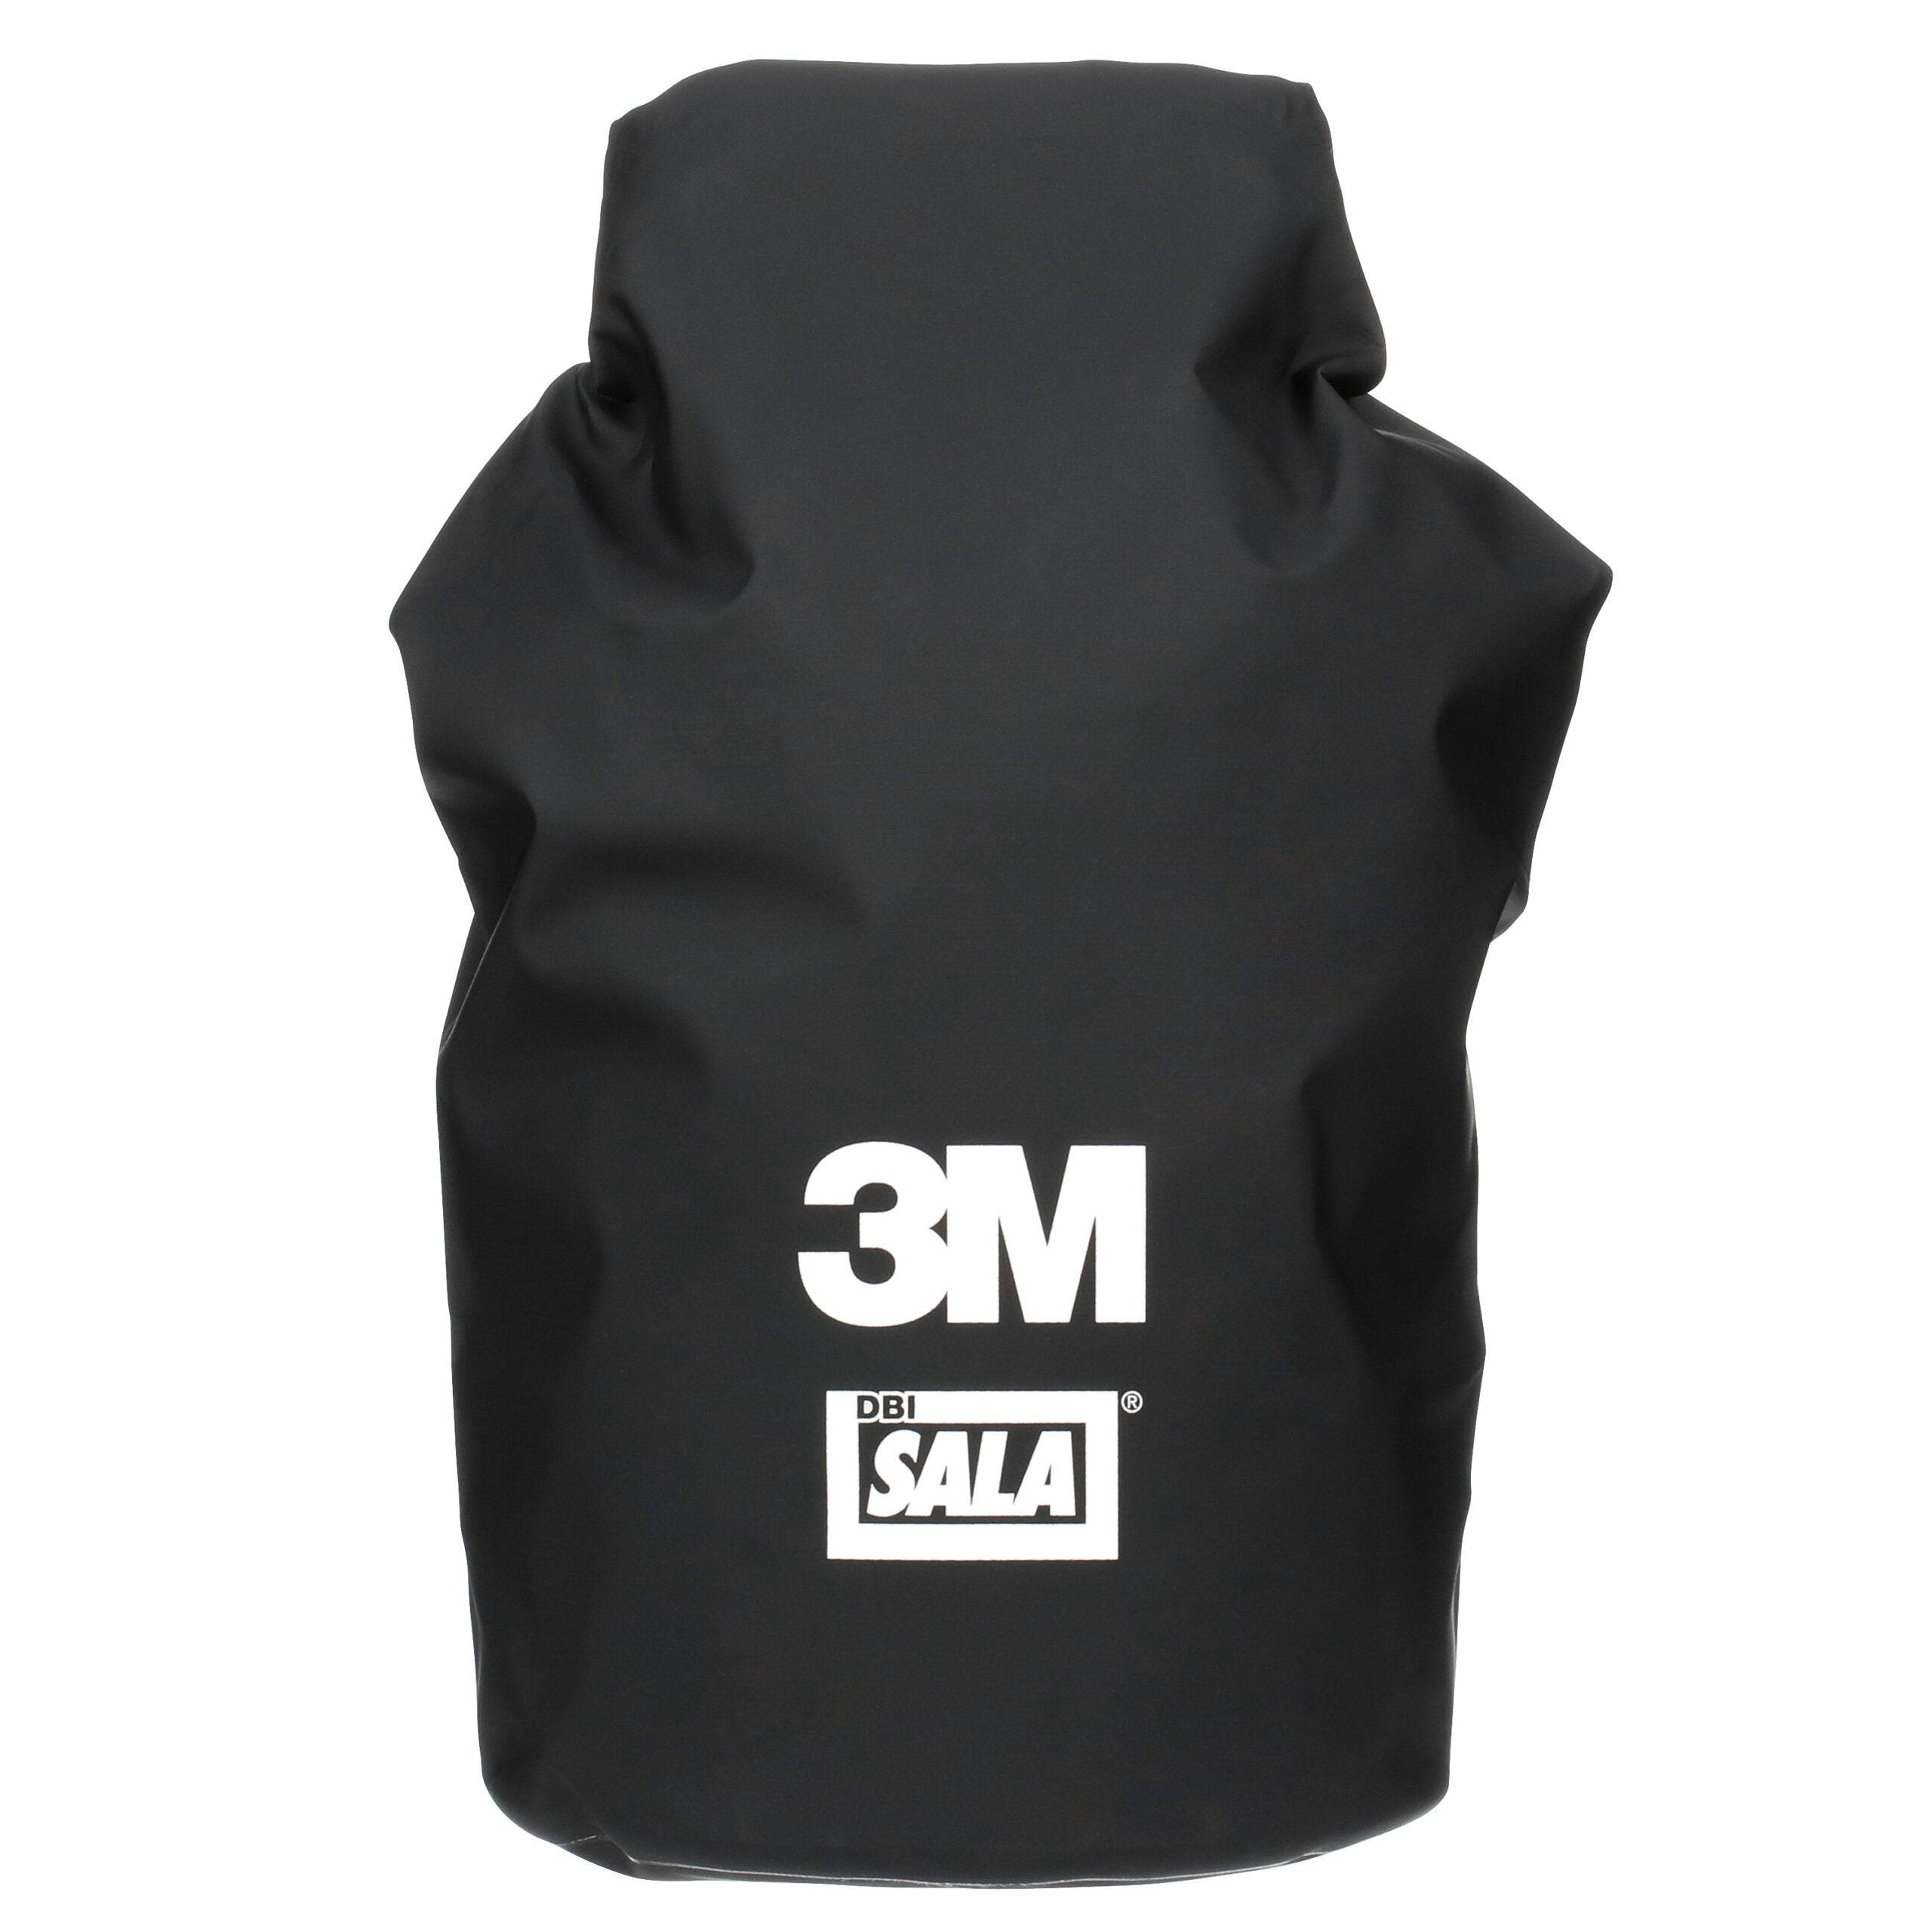 3M DBI SALA 20L Equipment Carrying and Storage Bag 9515749 - SecureHeights